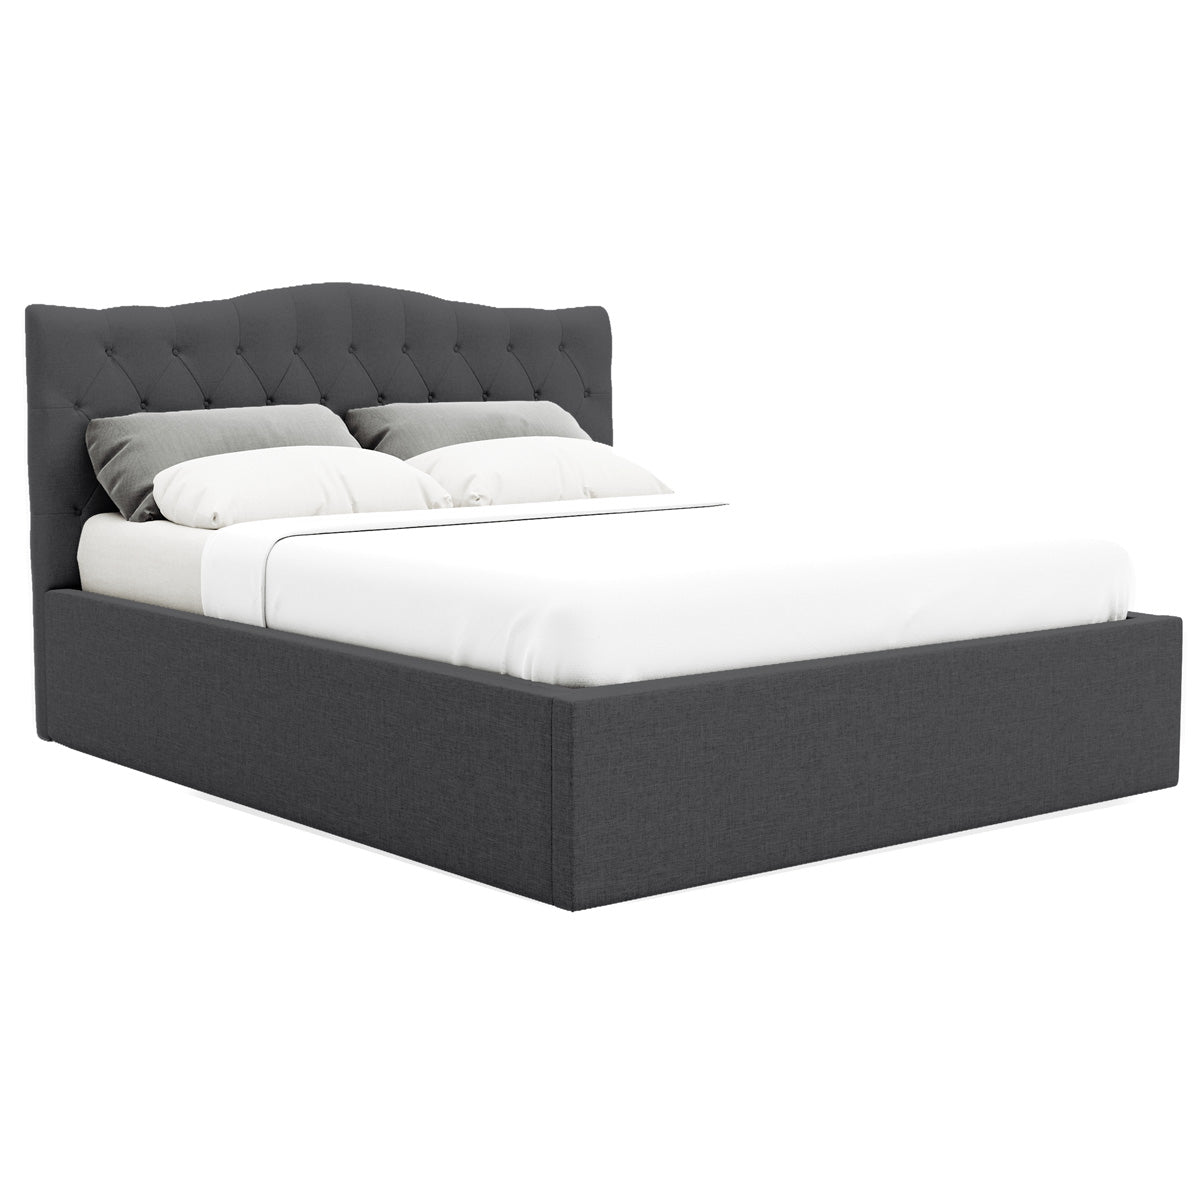 Gabrielle Gas Lift Storage Bed Frame (Charcoal Fabric)